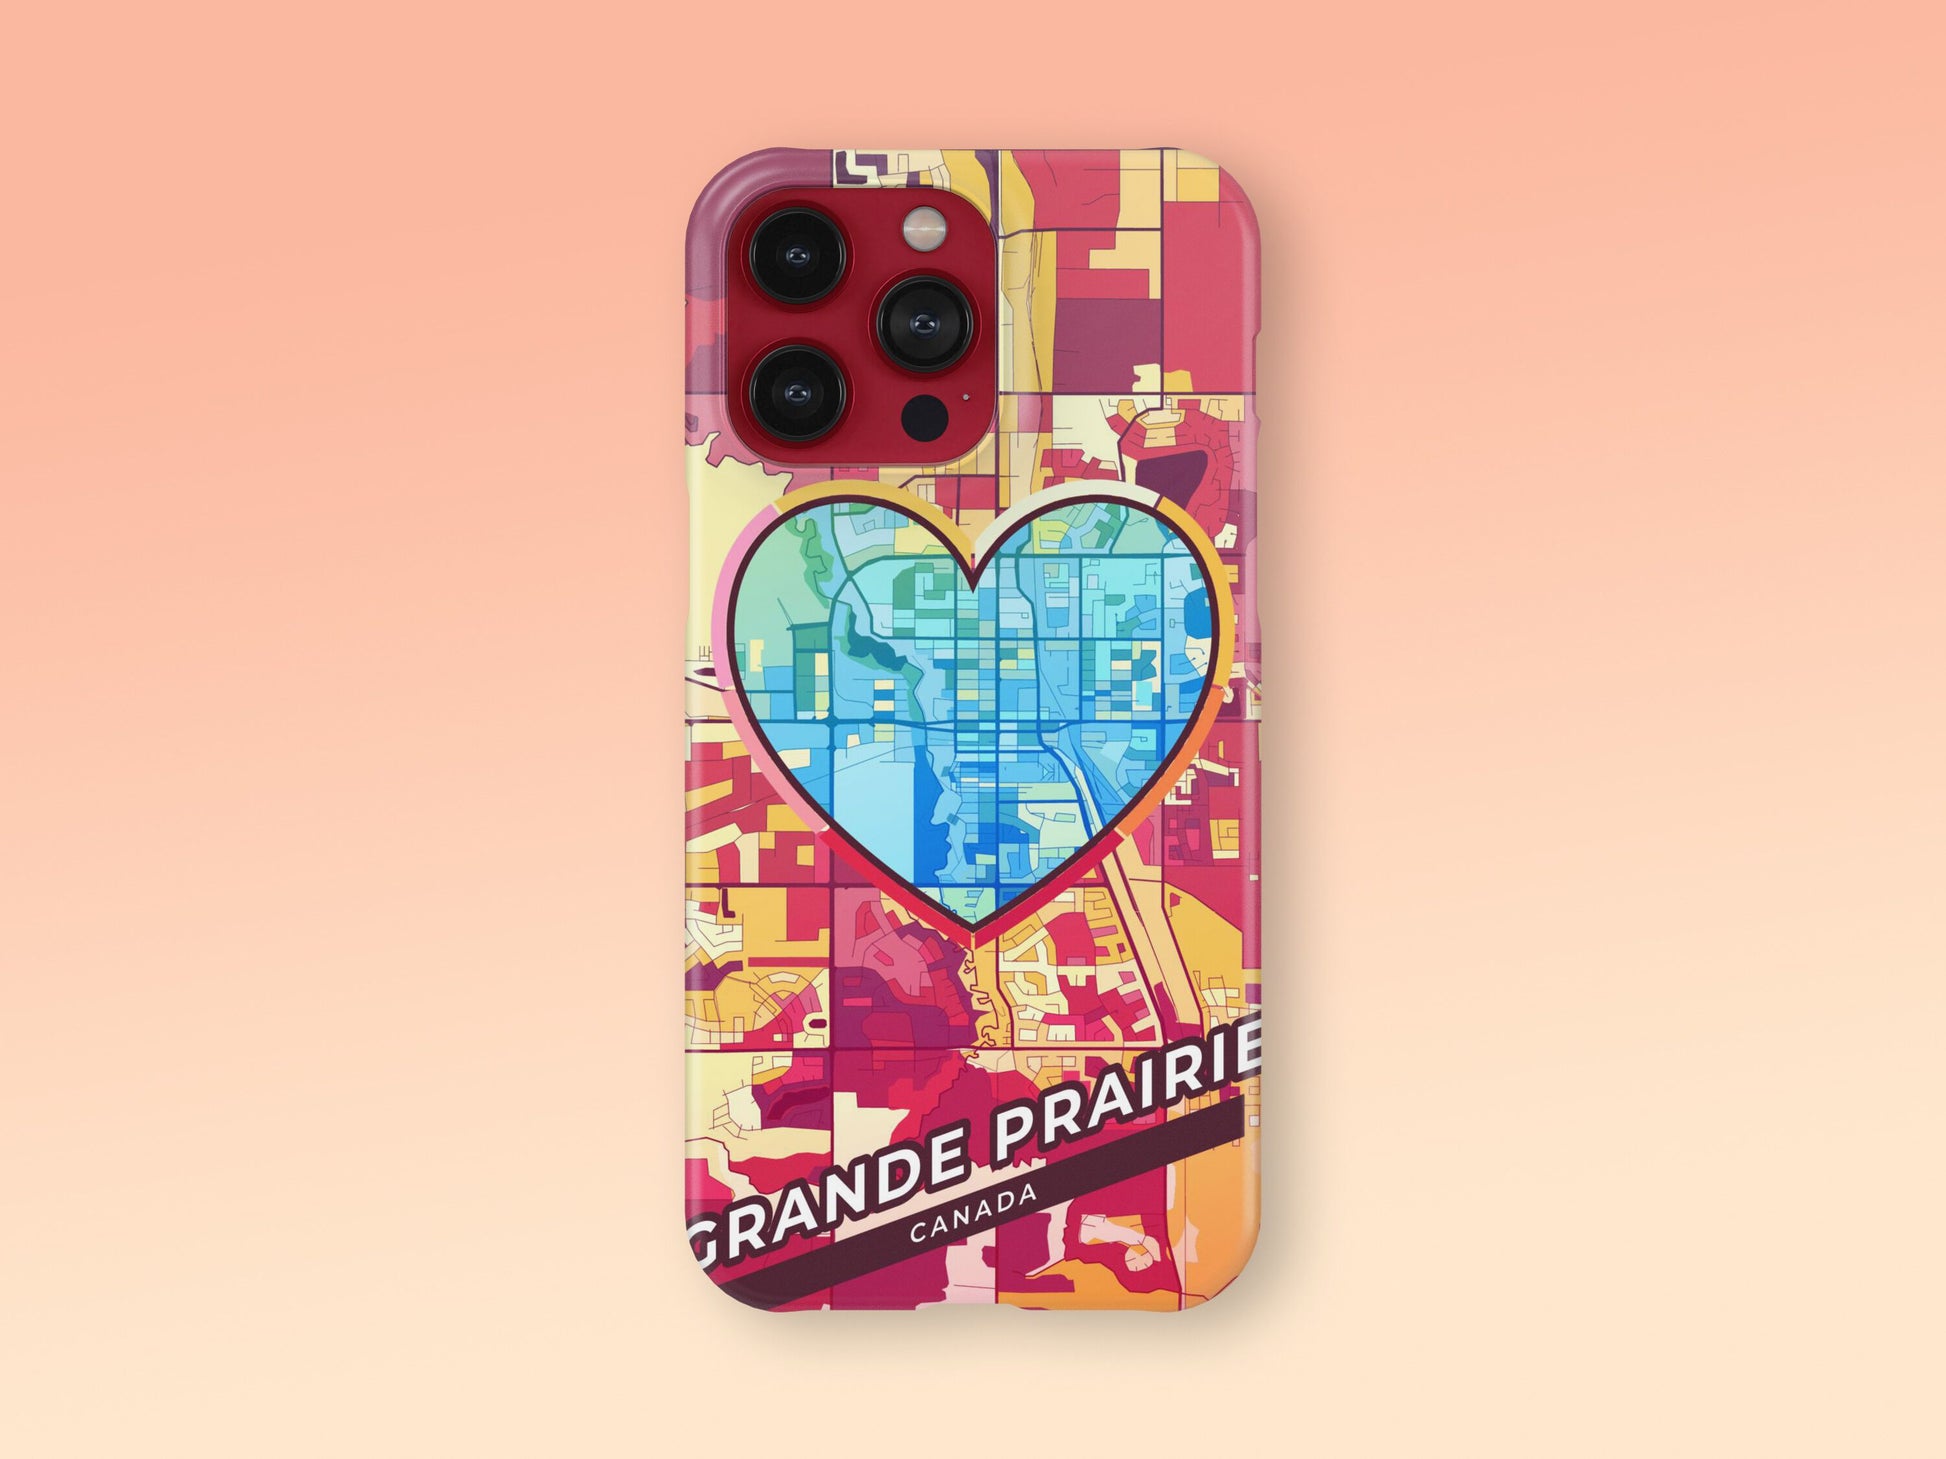 Grande Prairie Canada slim phone case with colorful icon. Birthday, wedding or housewarming gift. Couple match cases. 2